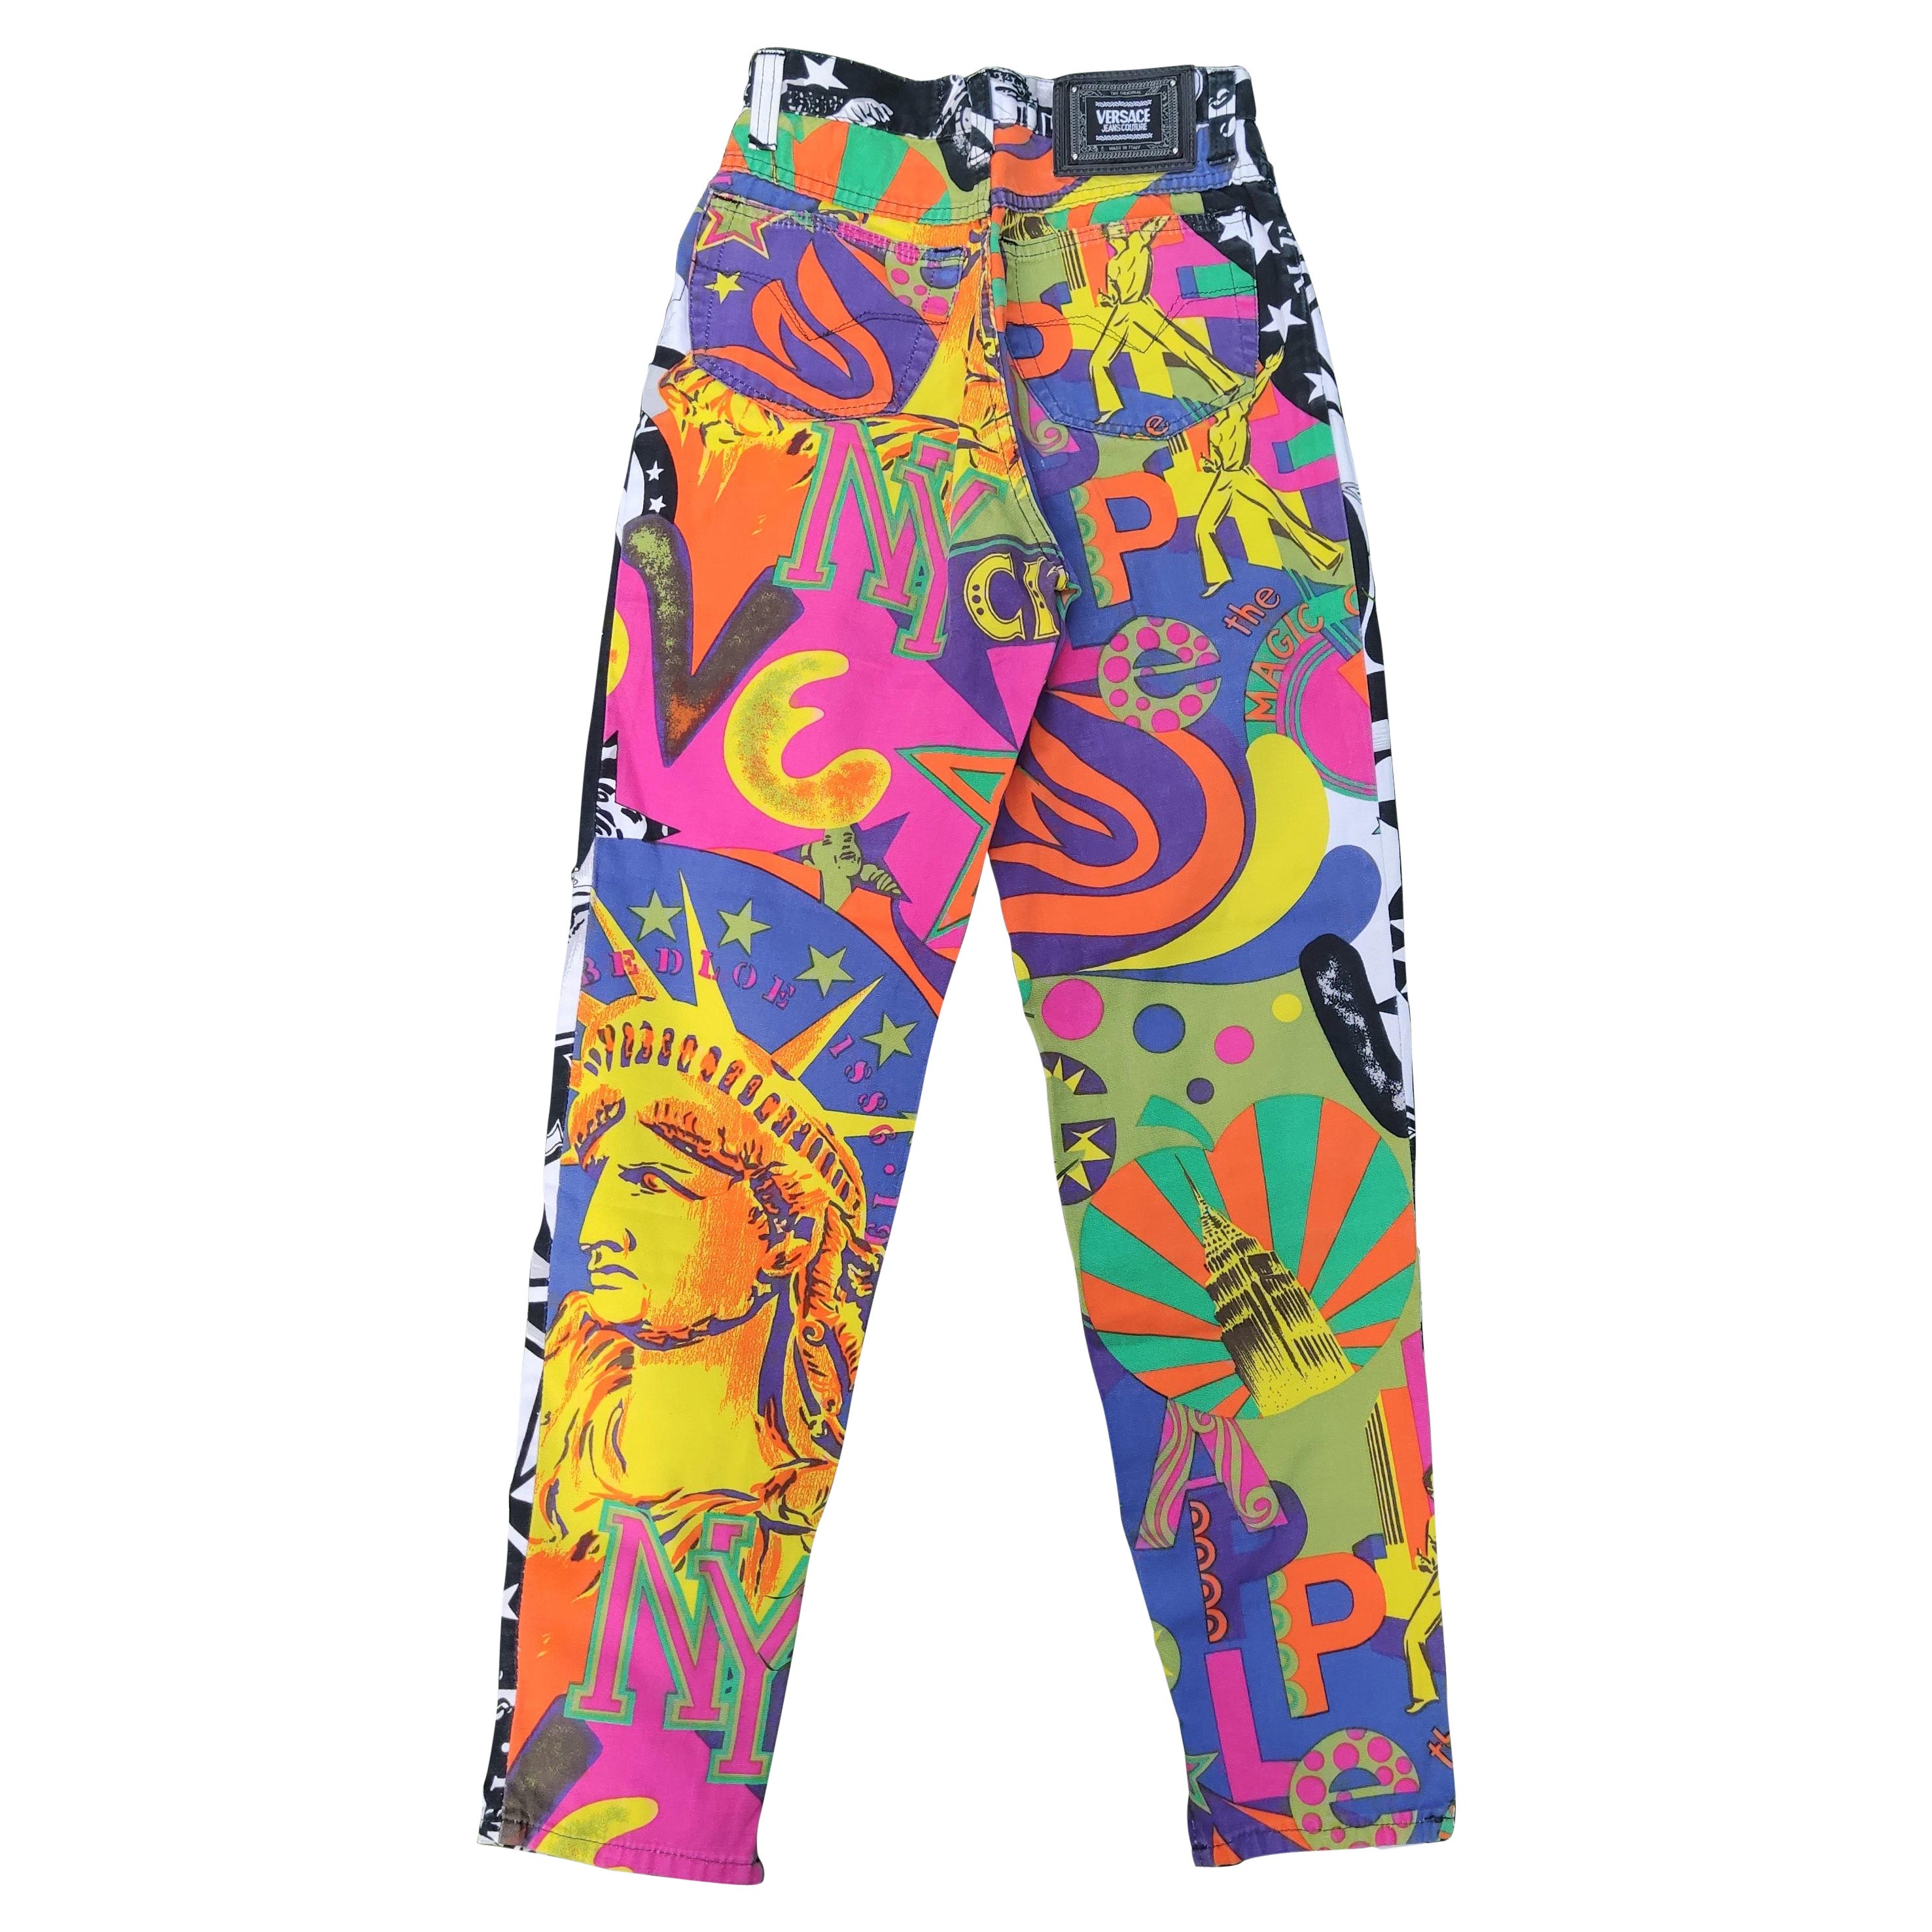 Gianni Versace Jeans Couture 90s Manhattan New York City Graffiti Pants For Sale